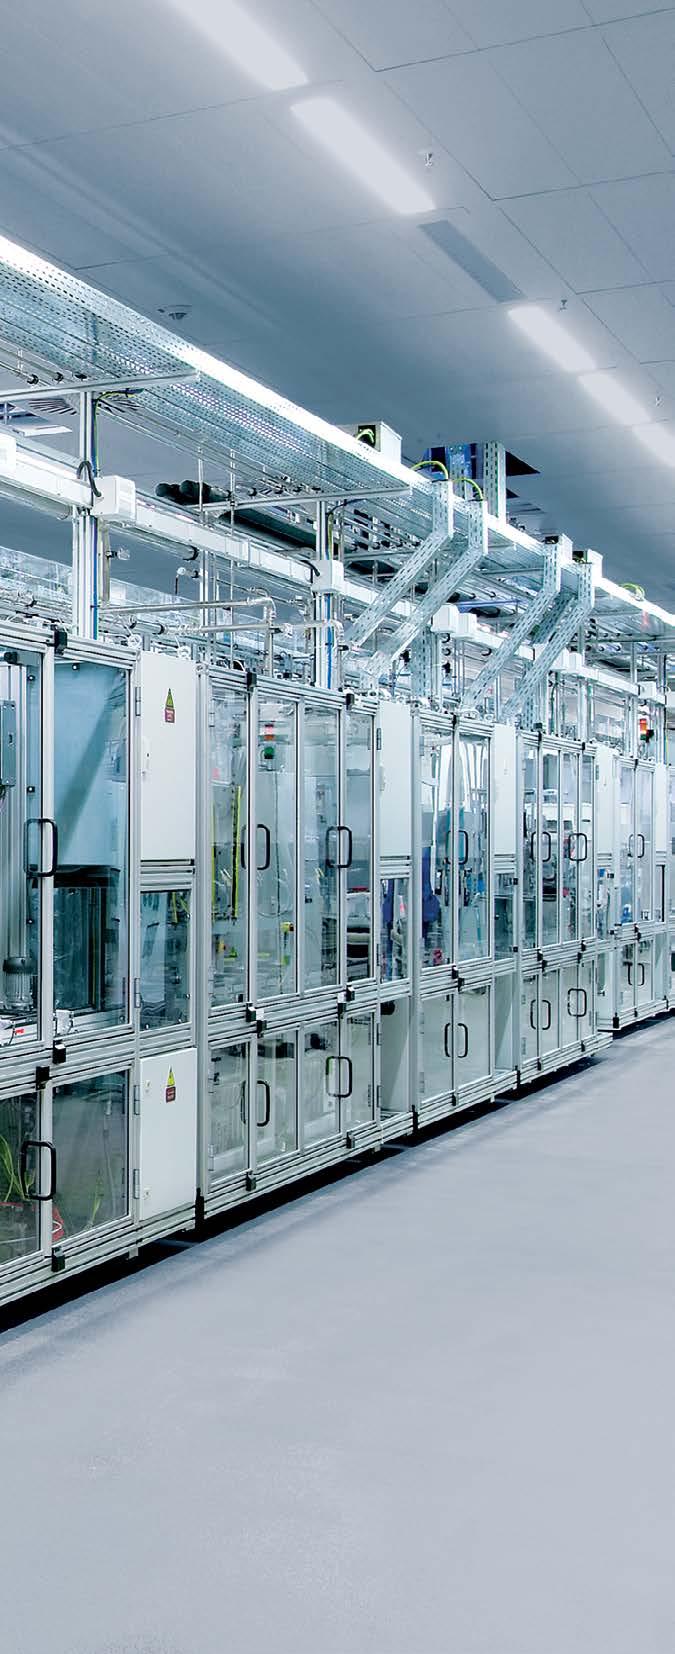 2 Flexibility with No Compromises The original The original Over 30 years ago, Bosch introduced its aluminum modular profile system worldwide in various industrial branches, making it possible for